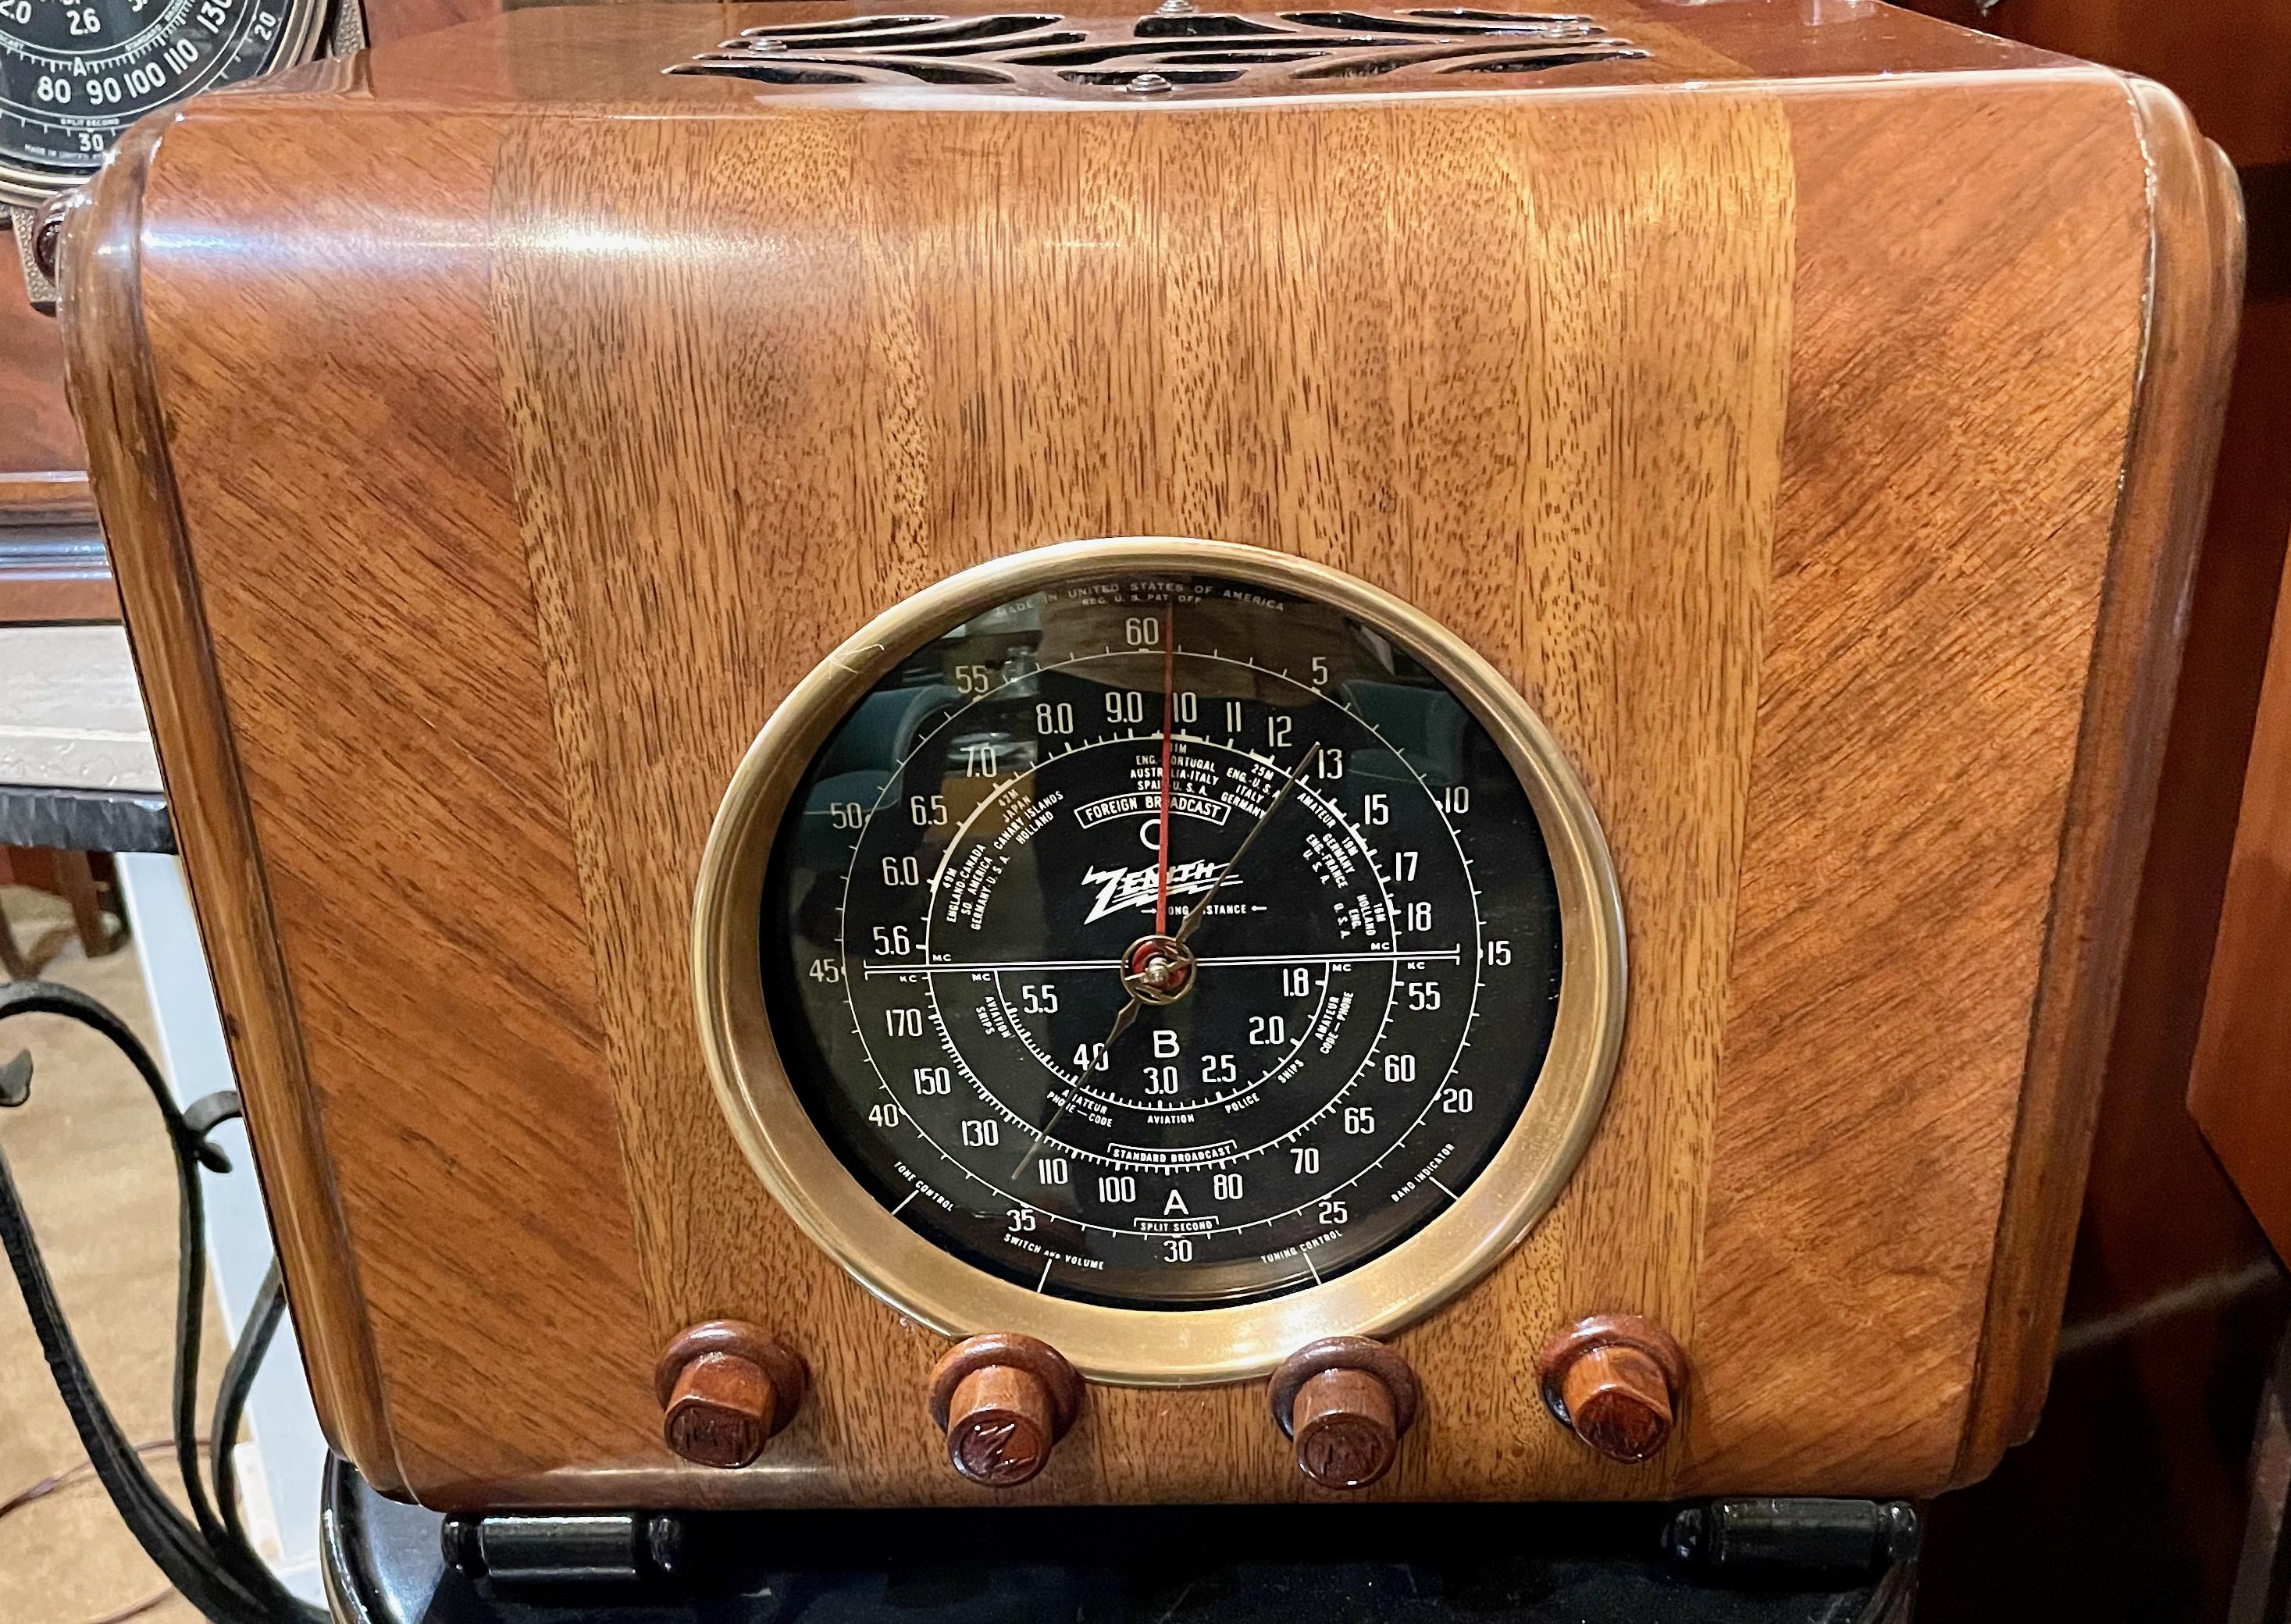 Zenith 6S222 Cube restored Bluetooth radio 1937-38 Top of the line. King of the cubes, the 6-S-222 is a 3-band radio with 6-tubes and a 6? upwards facing loudspeaker. The radio is completely restored both on the outside and inside, additional input